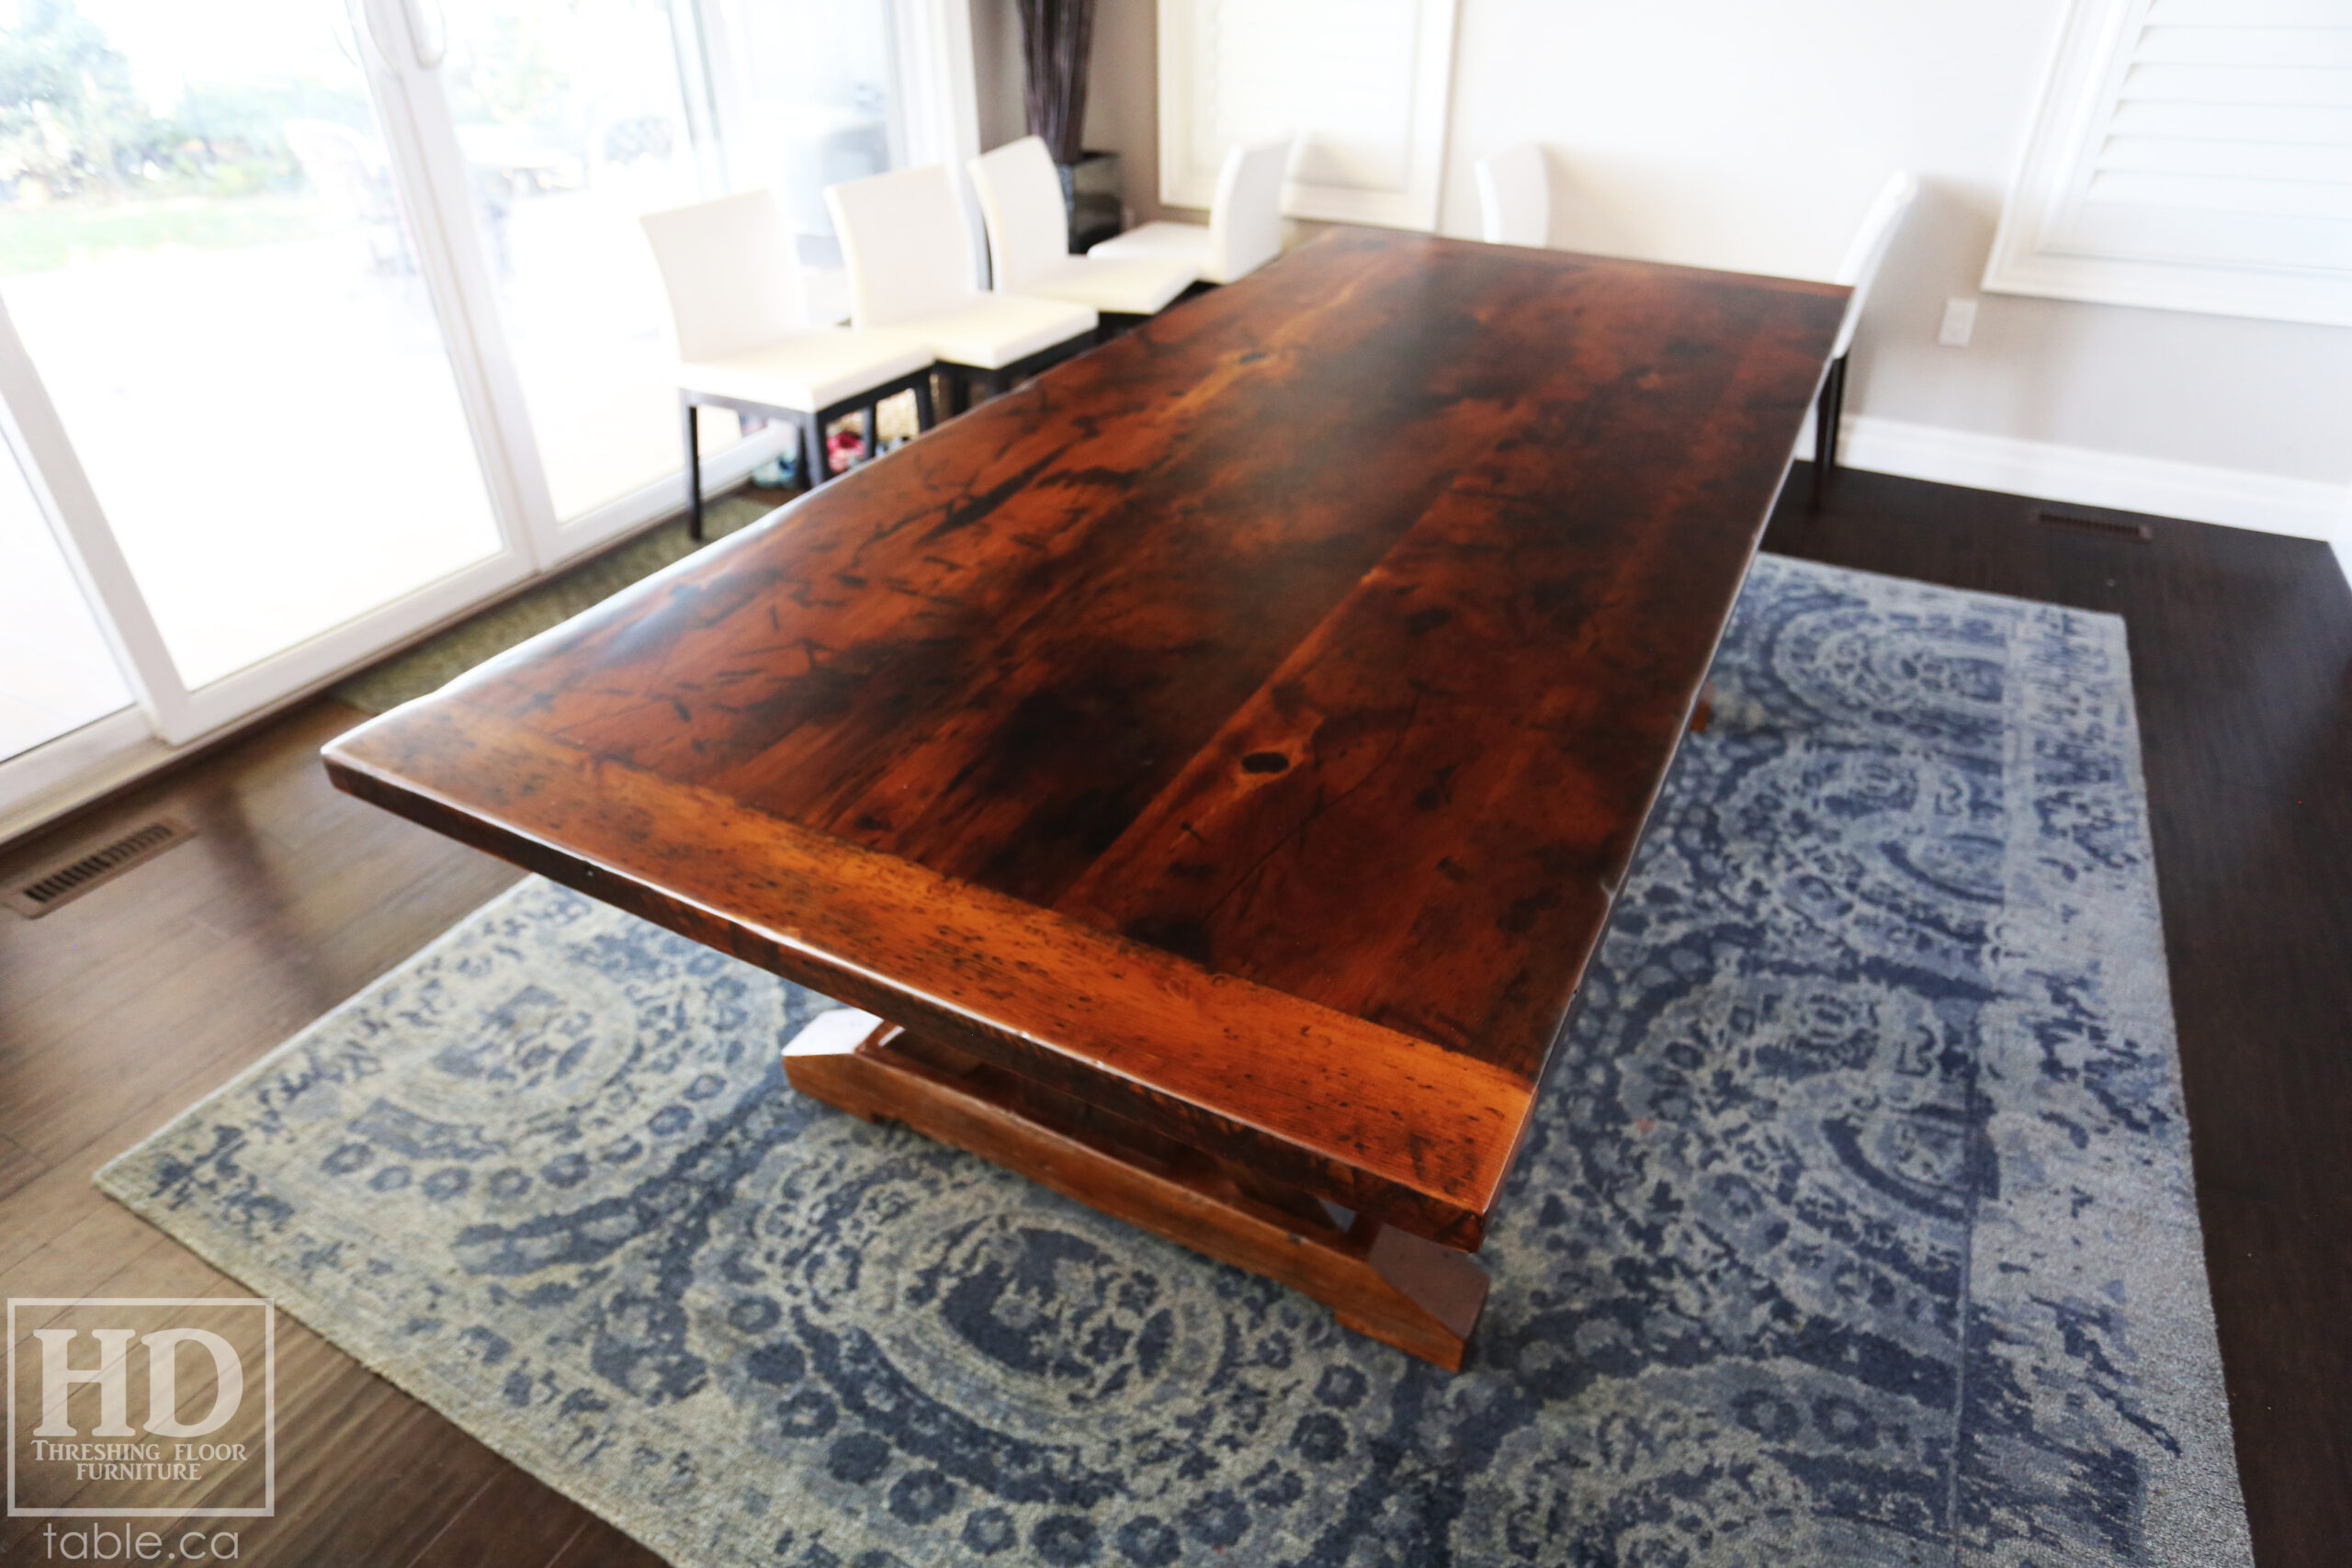 8 ft Reclaimed Ontario Barnwood Table we made for a Sarnia, Ontario home - 42â€ wide â€“ Sawbuck Base - Reclaimed Hemlock Threshing Floor Construction â€“ Original edges & distressing maintained â€“ Premium epoxy + matte polyurethane finish - www.table.ca